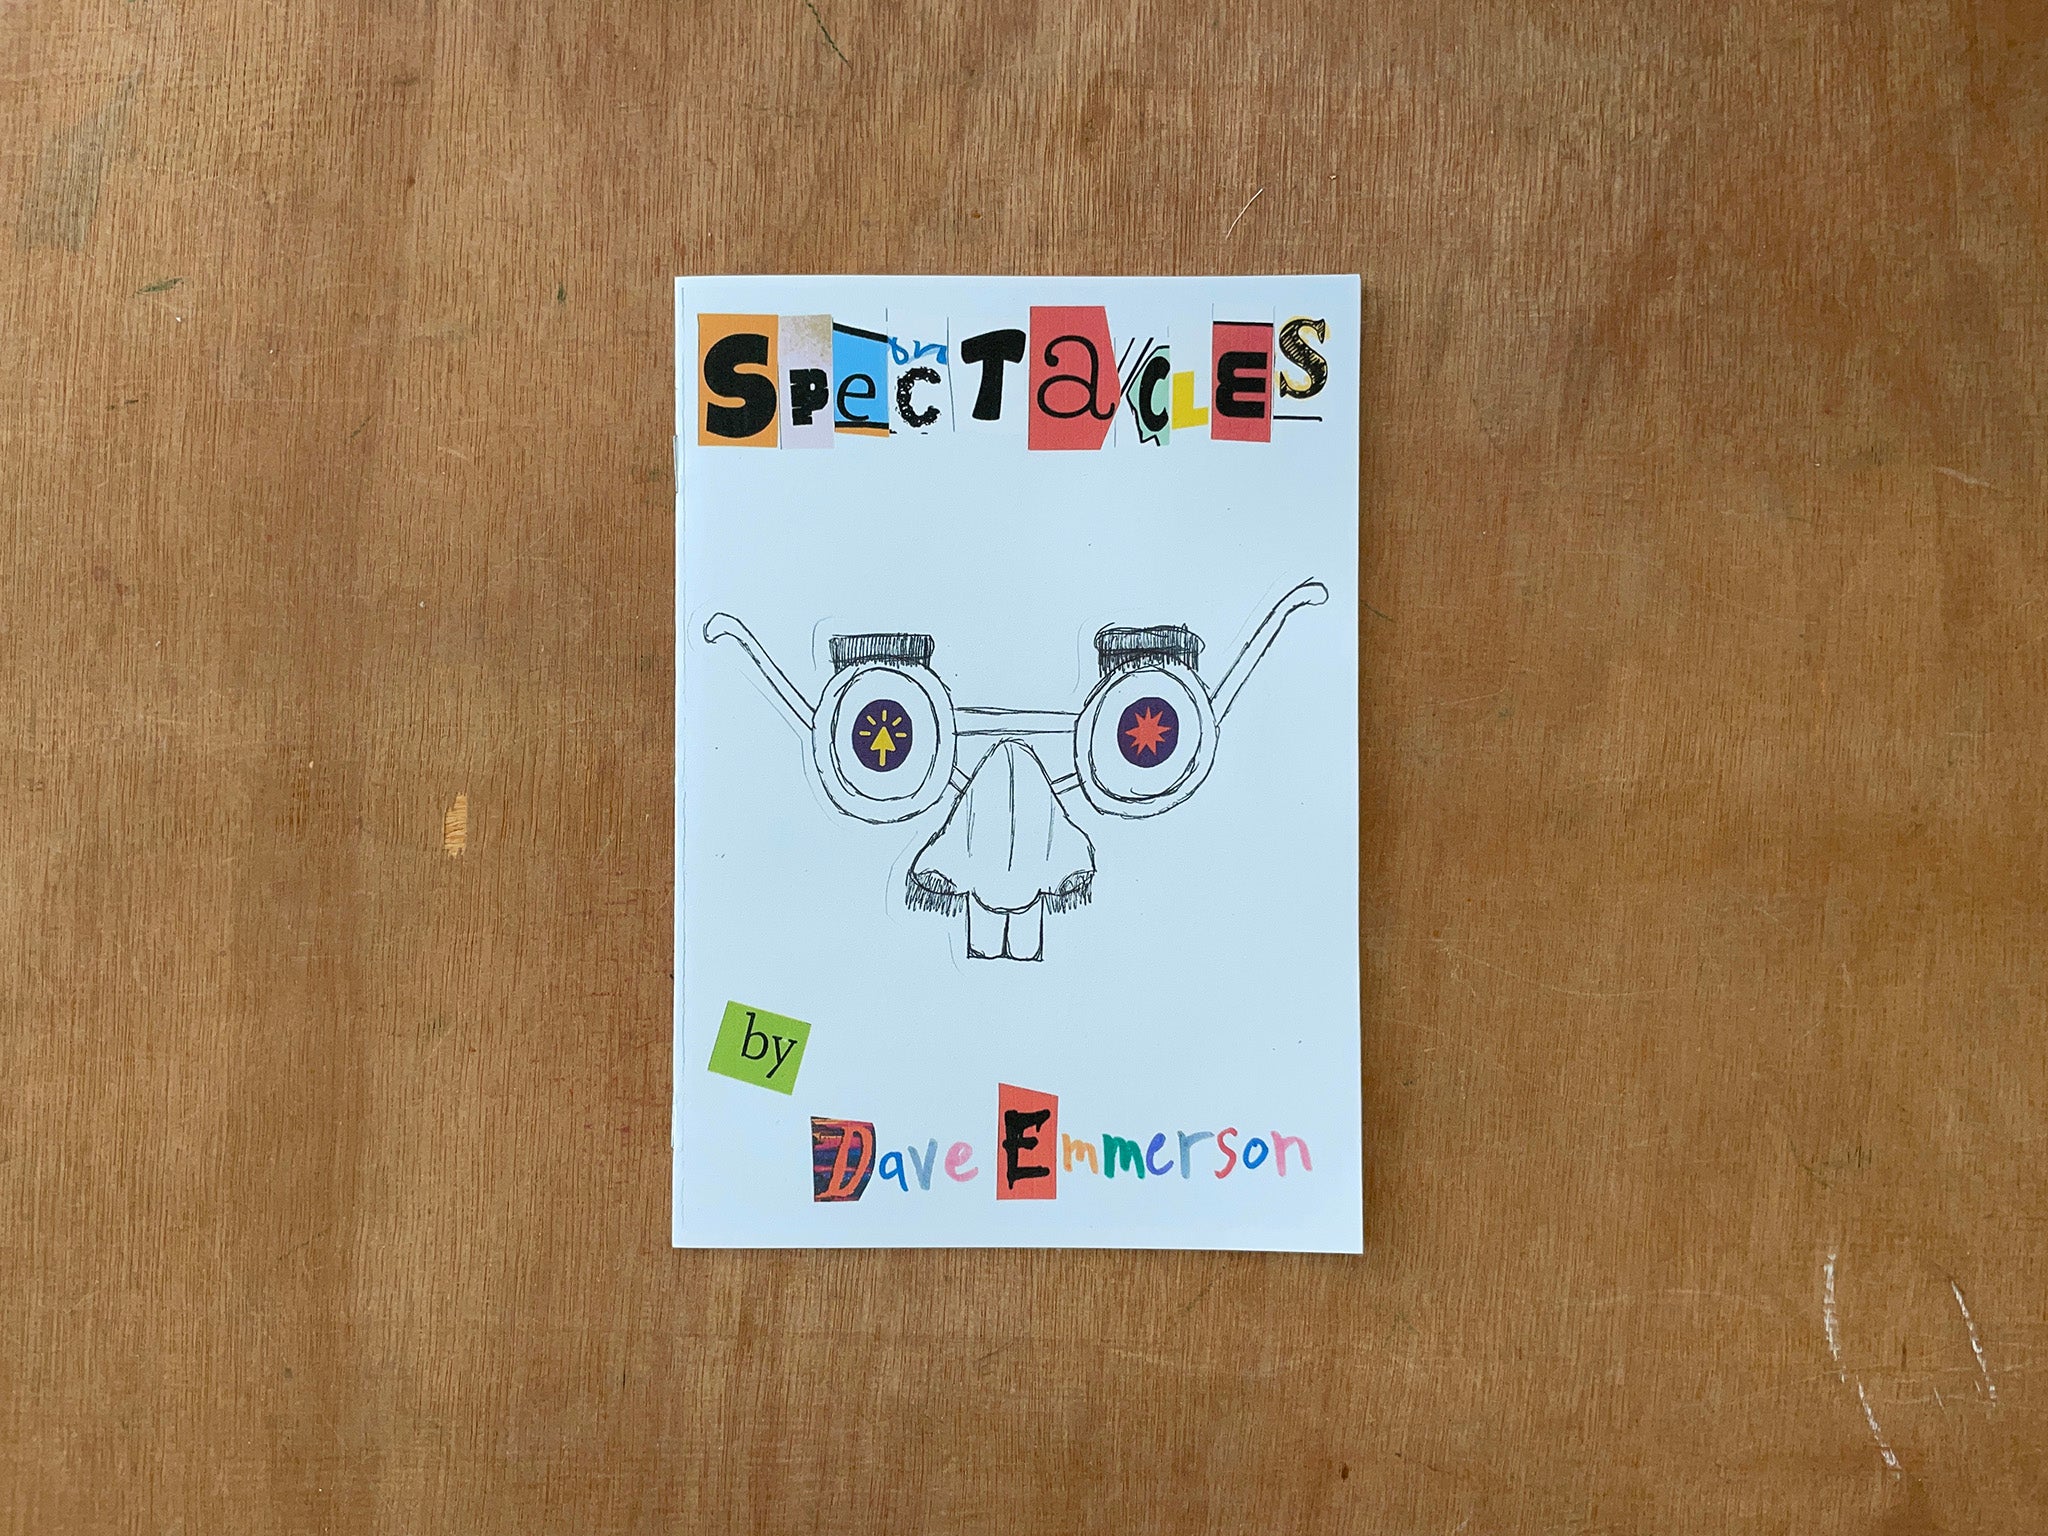 SPECTACLES by Dave Emmerson